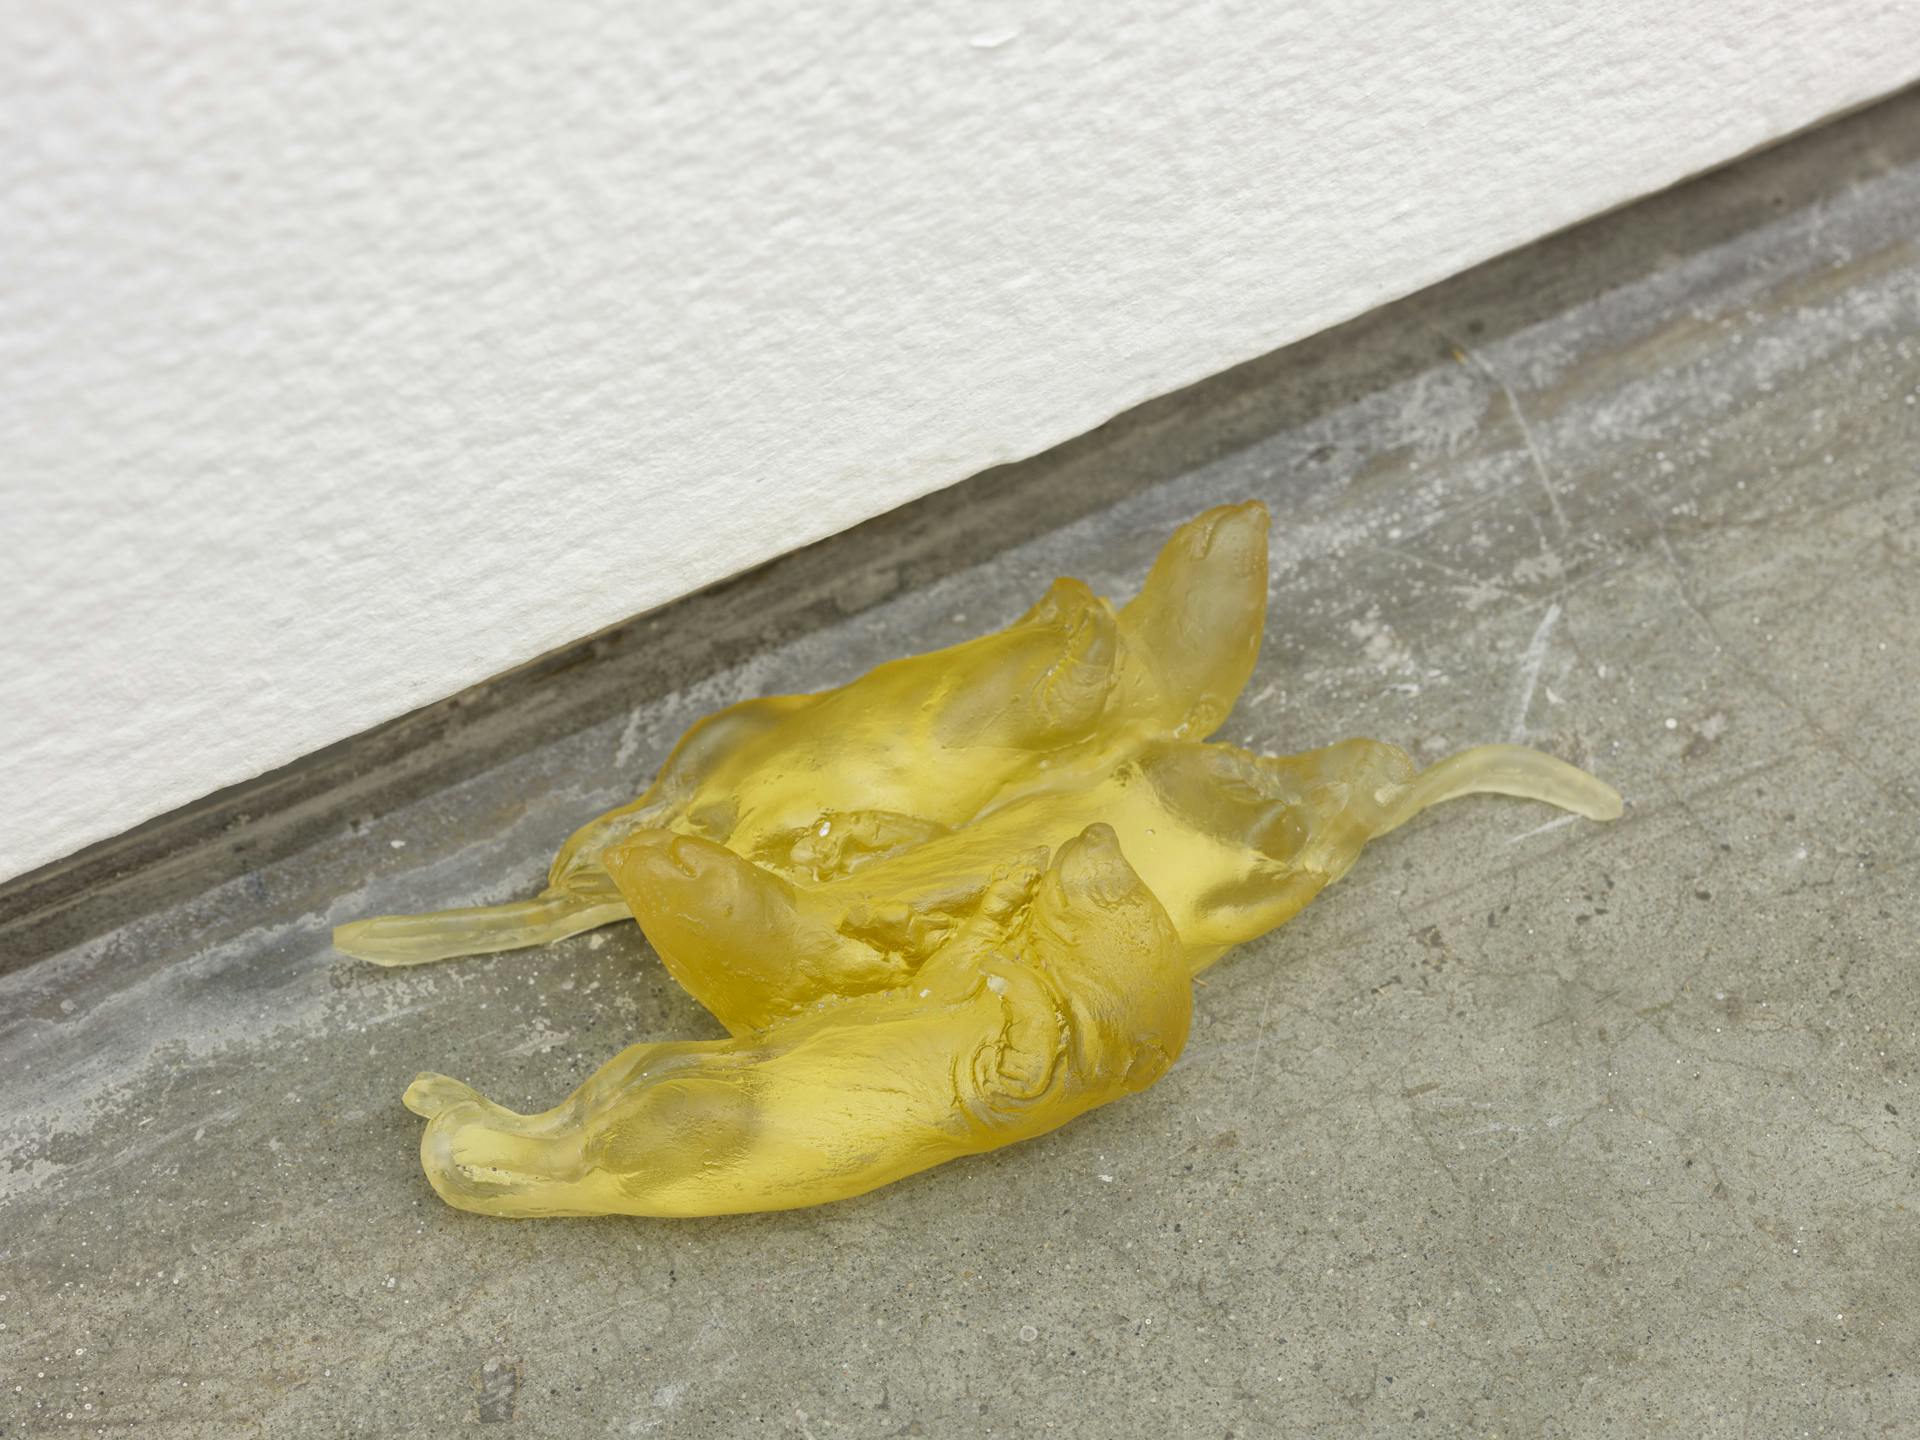 A yellow-coloured cast glass sculpture depicting three rat pups sits near the edge of the floor and the wall.